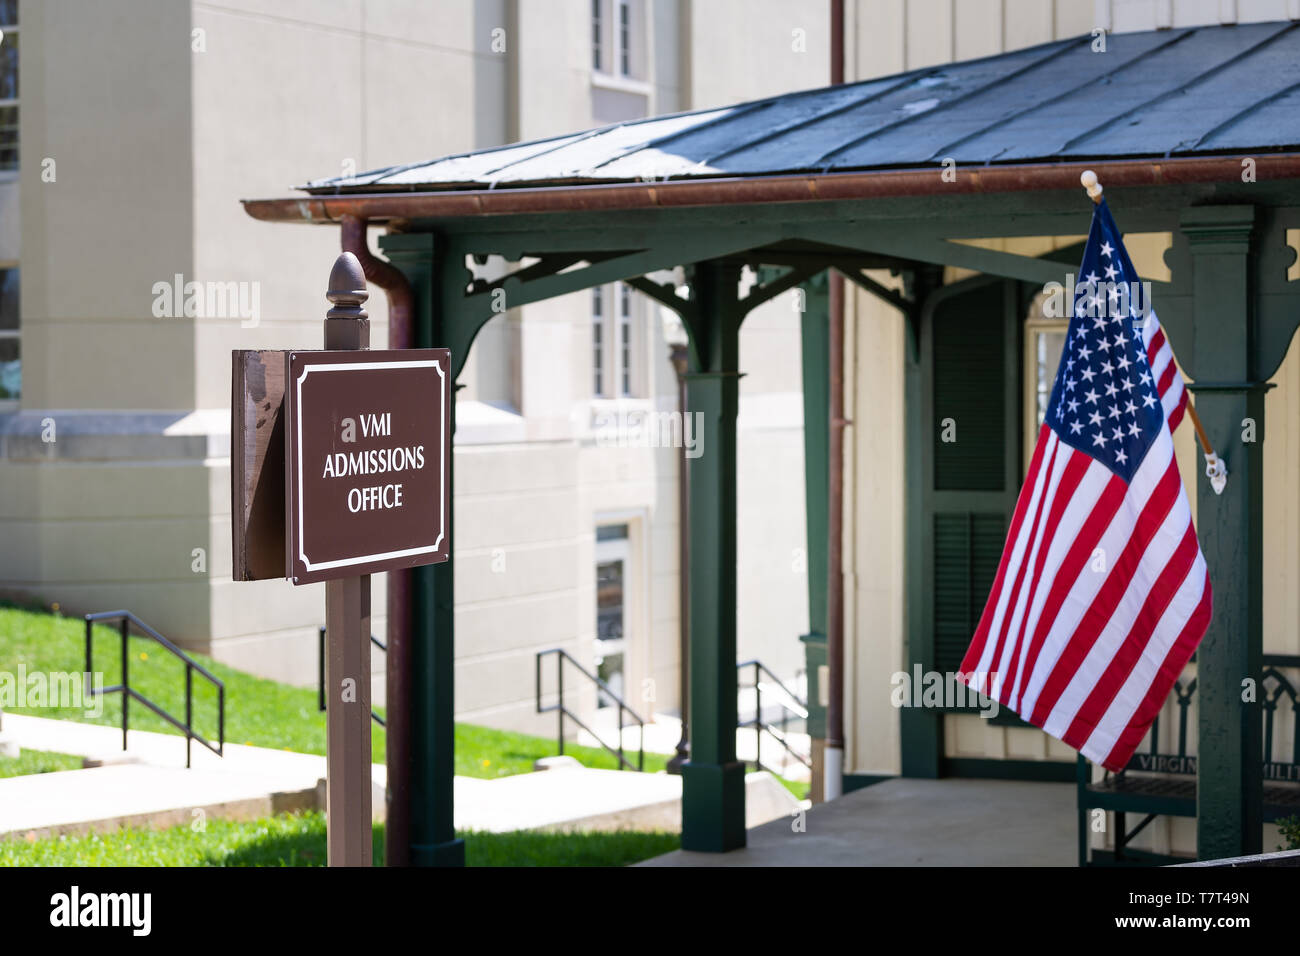 Lexington, USA - April 18, 2018: VMI Virginia Military Institute admissions office building with sign in Virginia university campus with nobody and Am Stock Photo